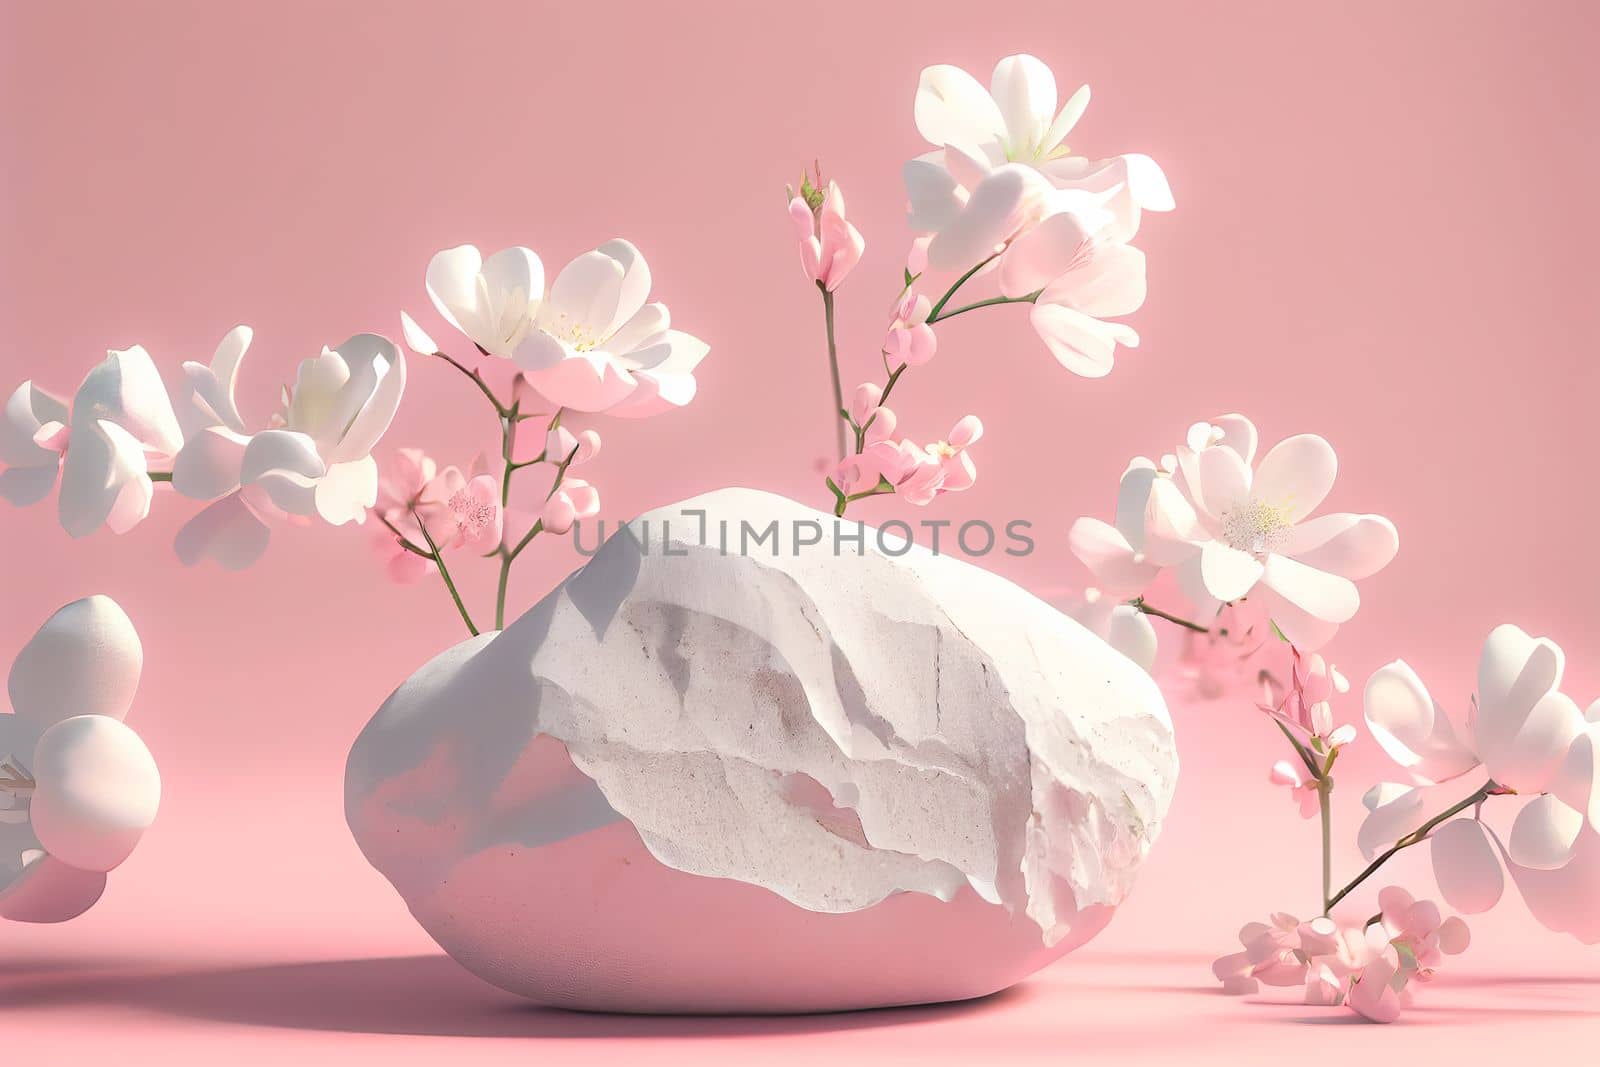 White stones with blossom flowers on pink background. Panoramic banner background with copy space. by FokasuArt